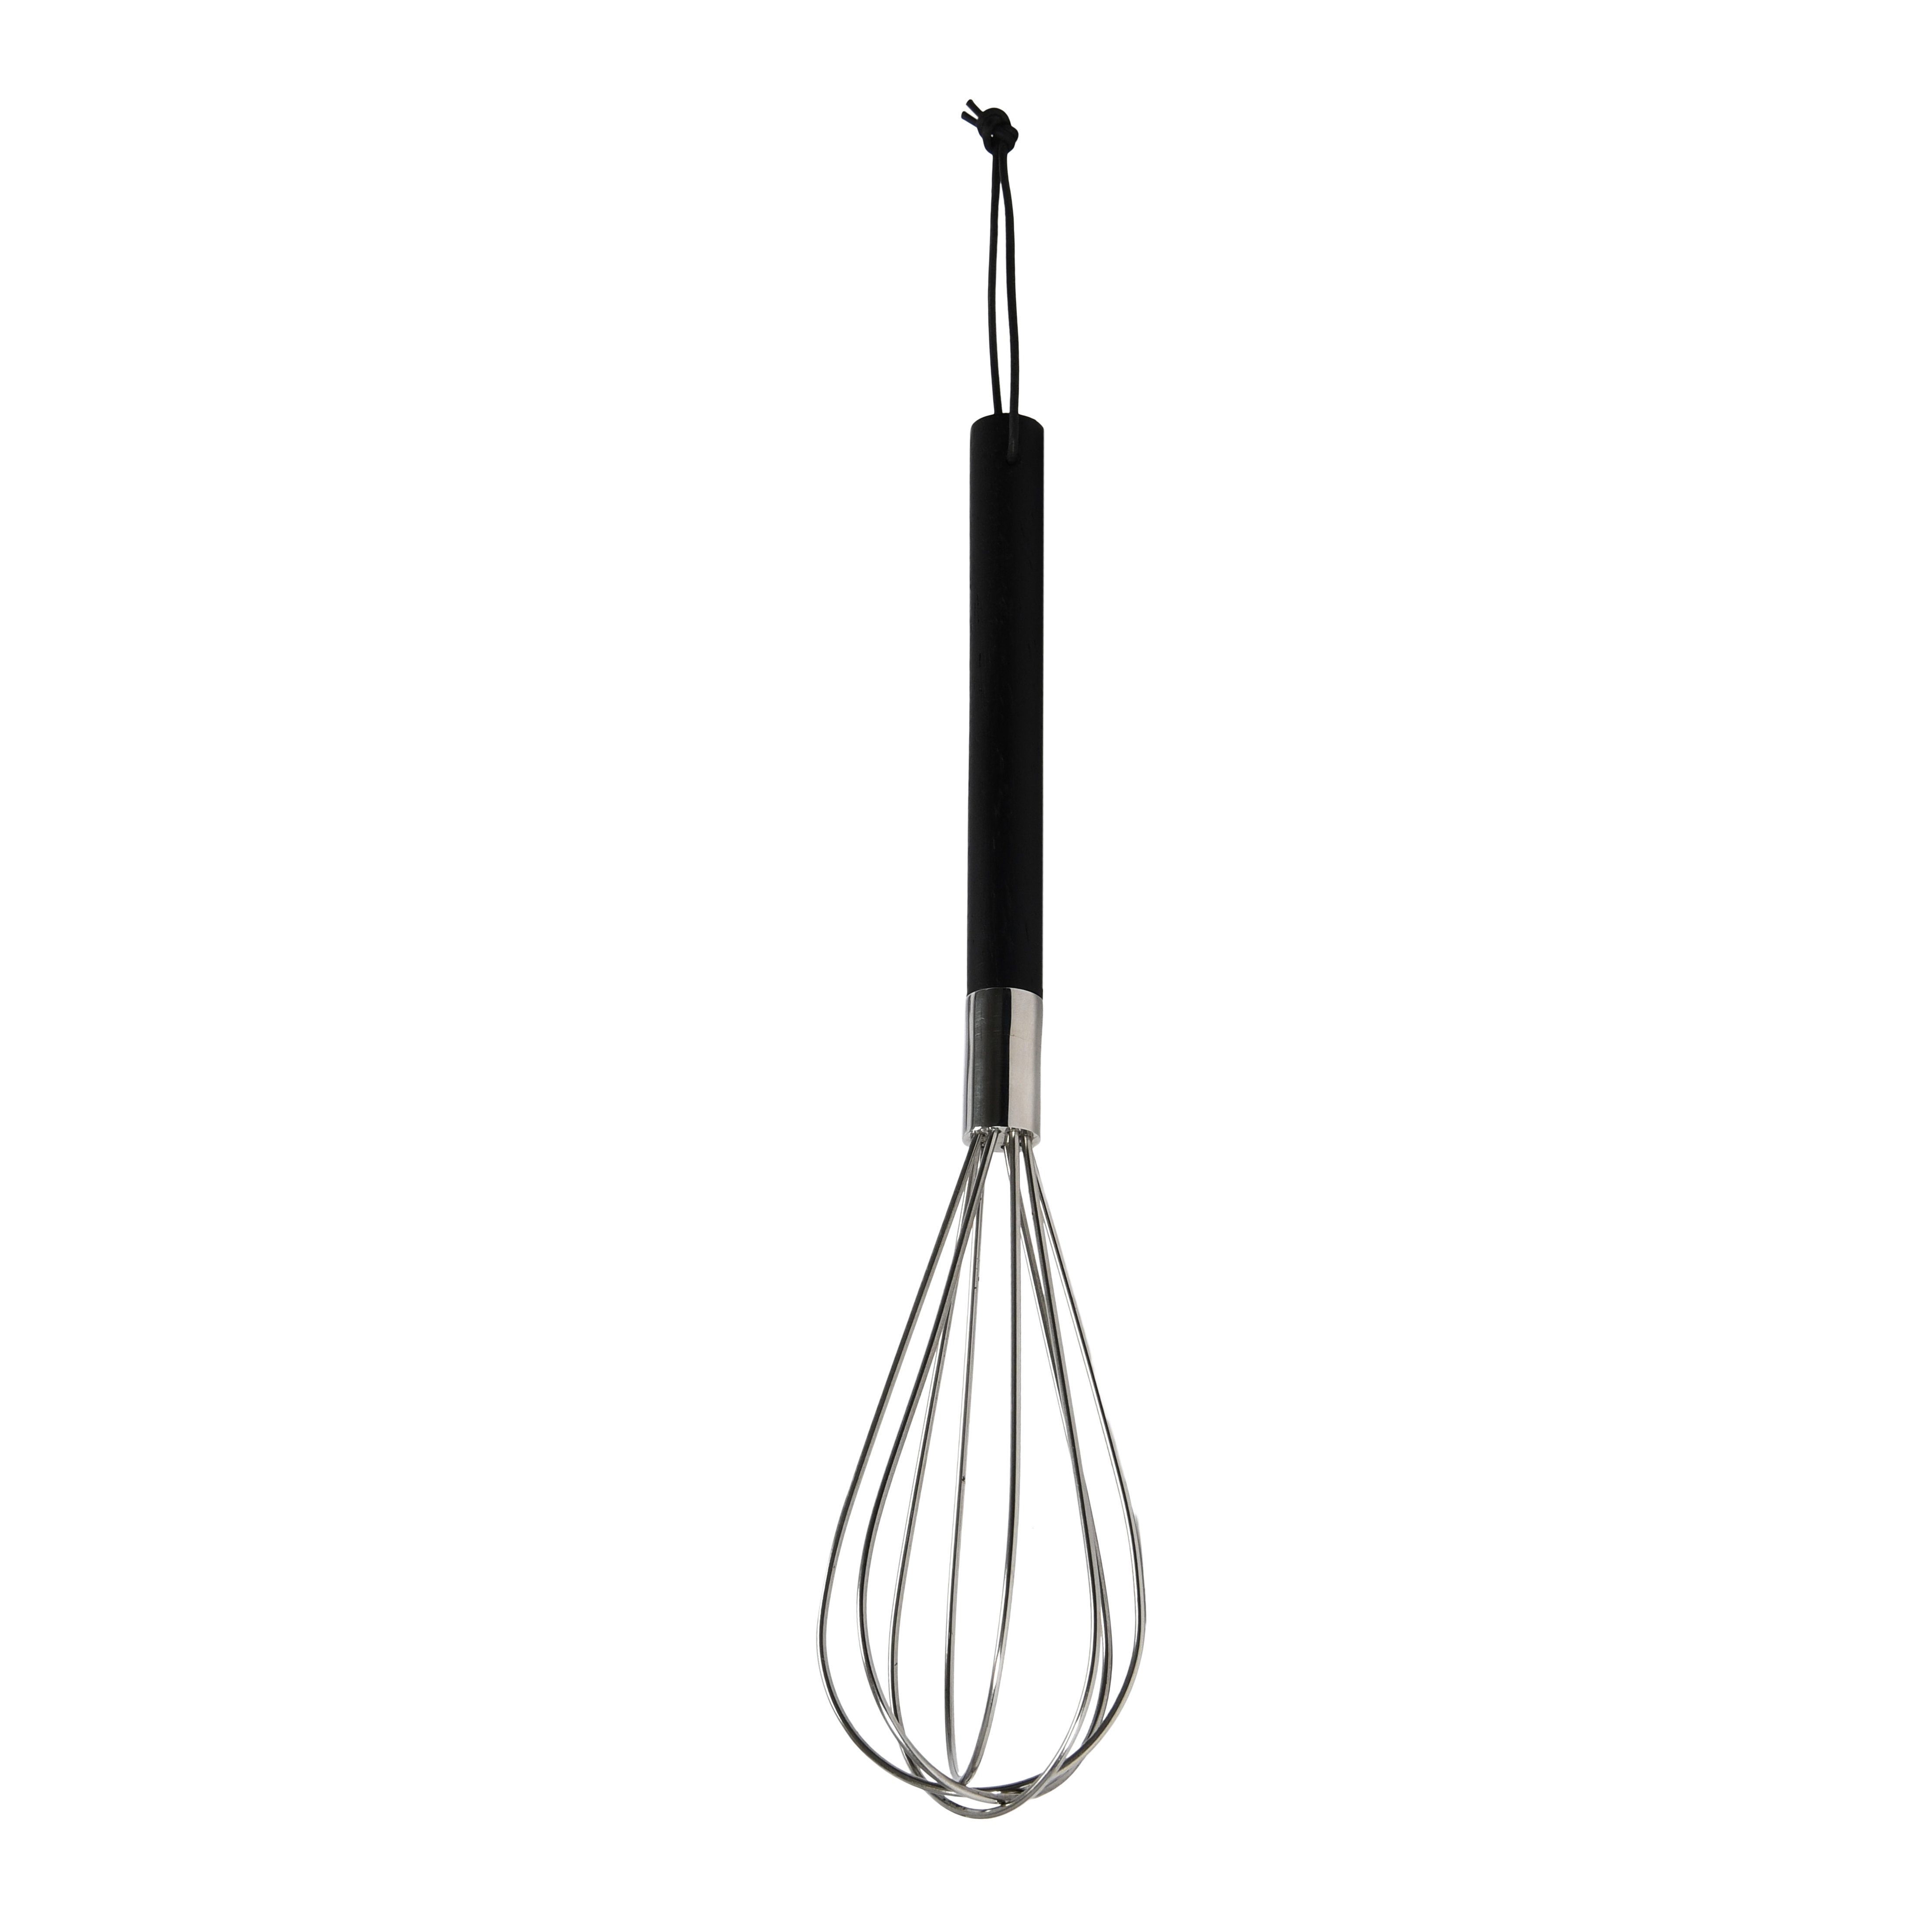  Stainless Steel Whisk with Mango Wood Handle and Leather Tie, Black - Image 0